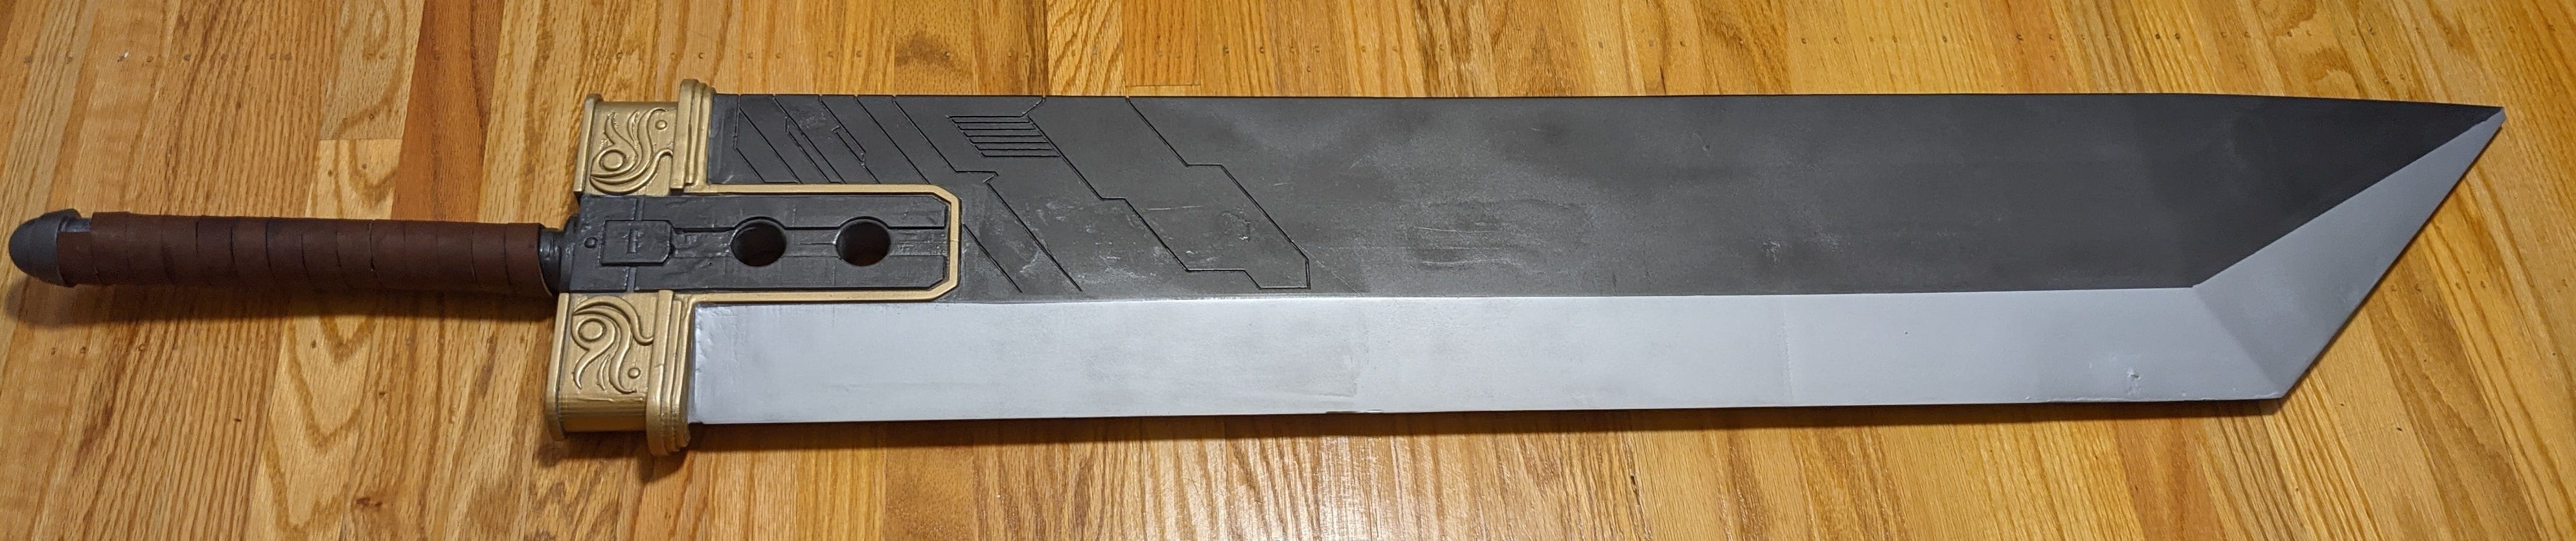 3D Printed Buster Sword. After Shelter-In-Place started, I…, by monofuel